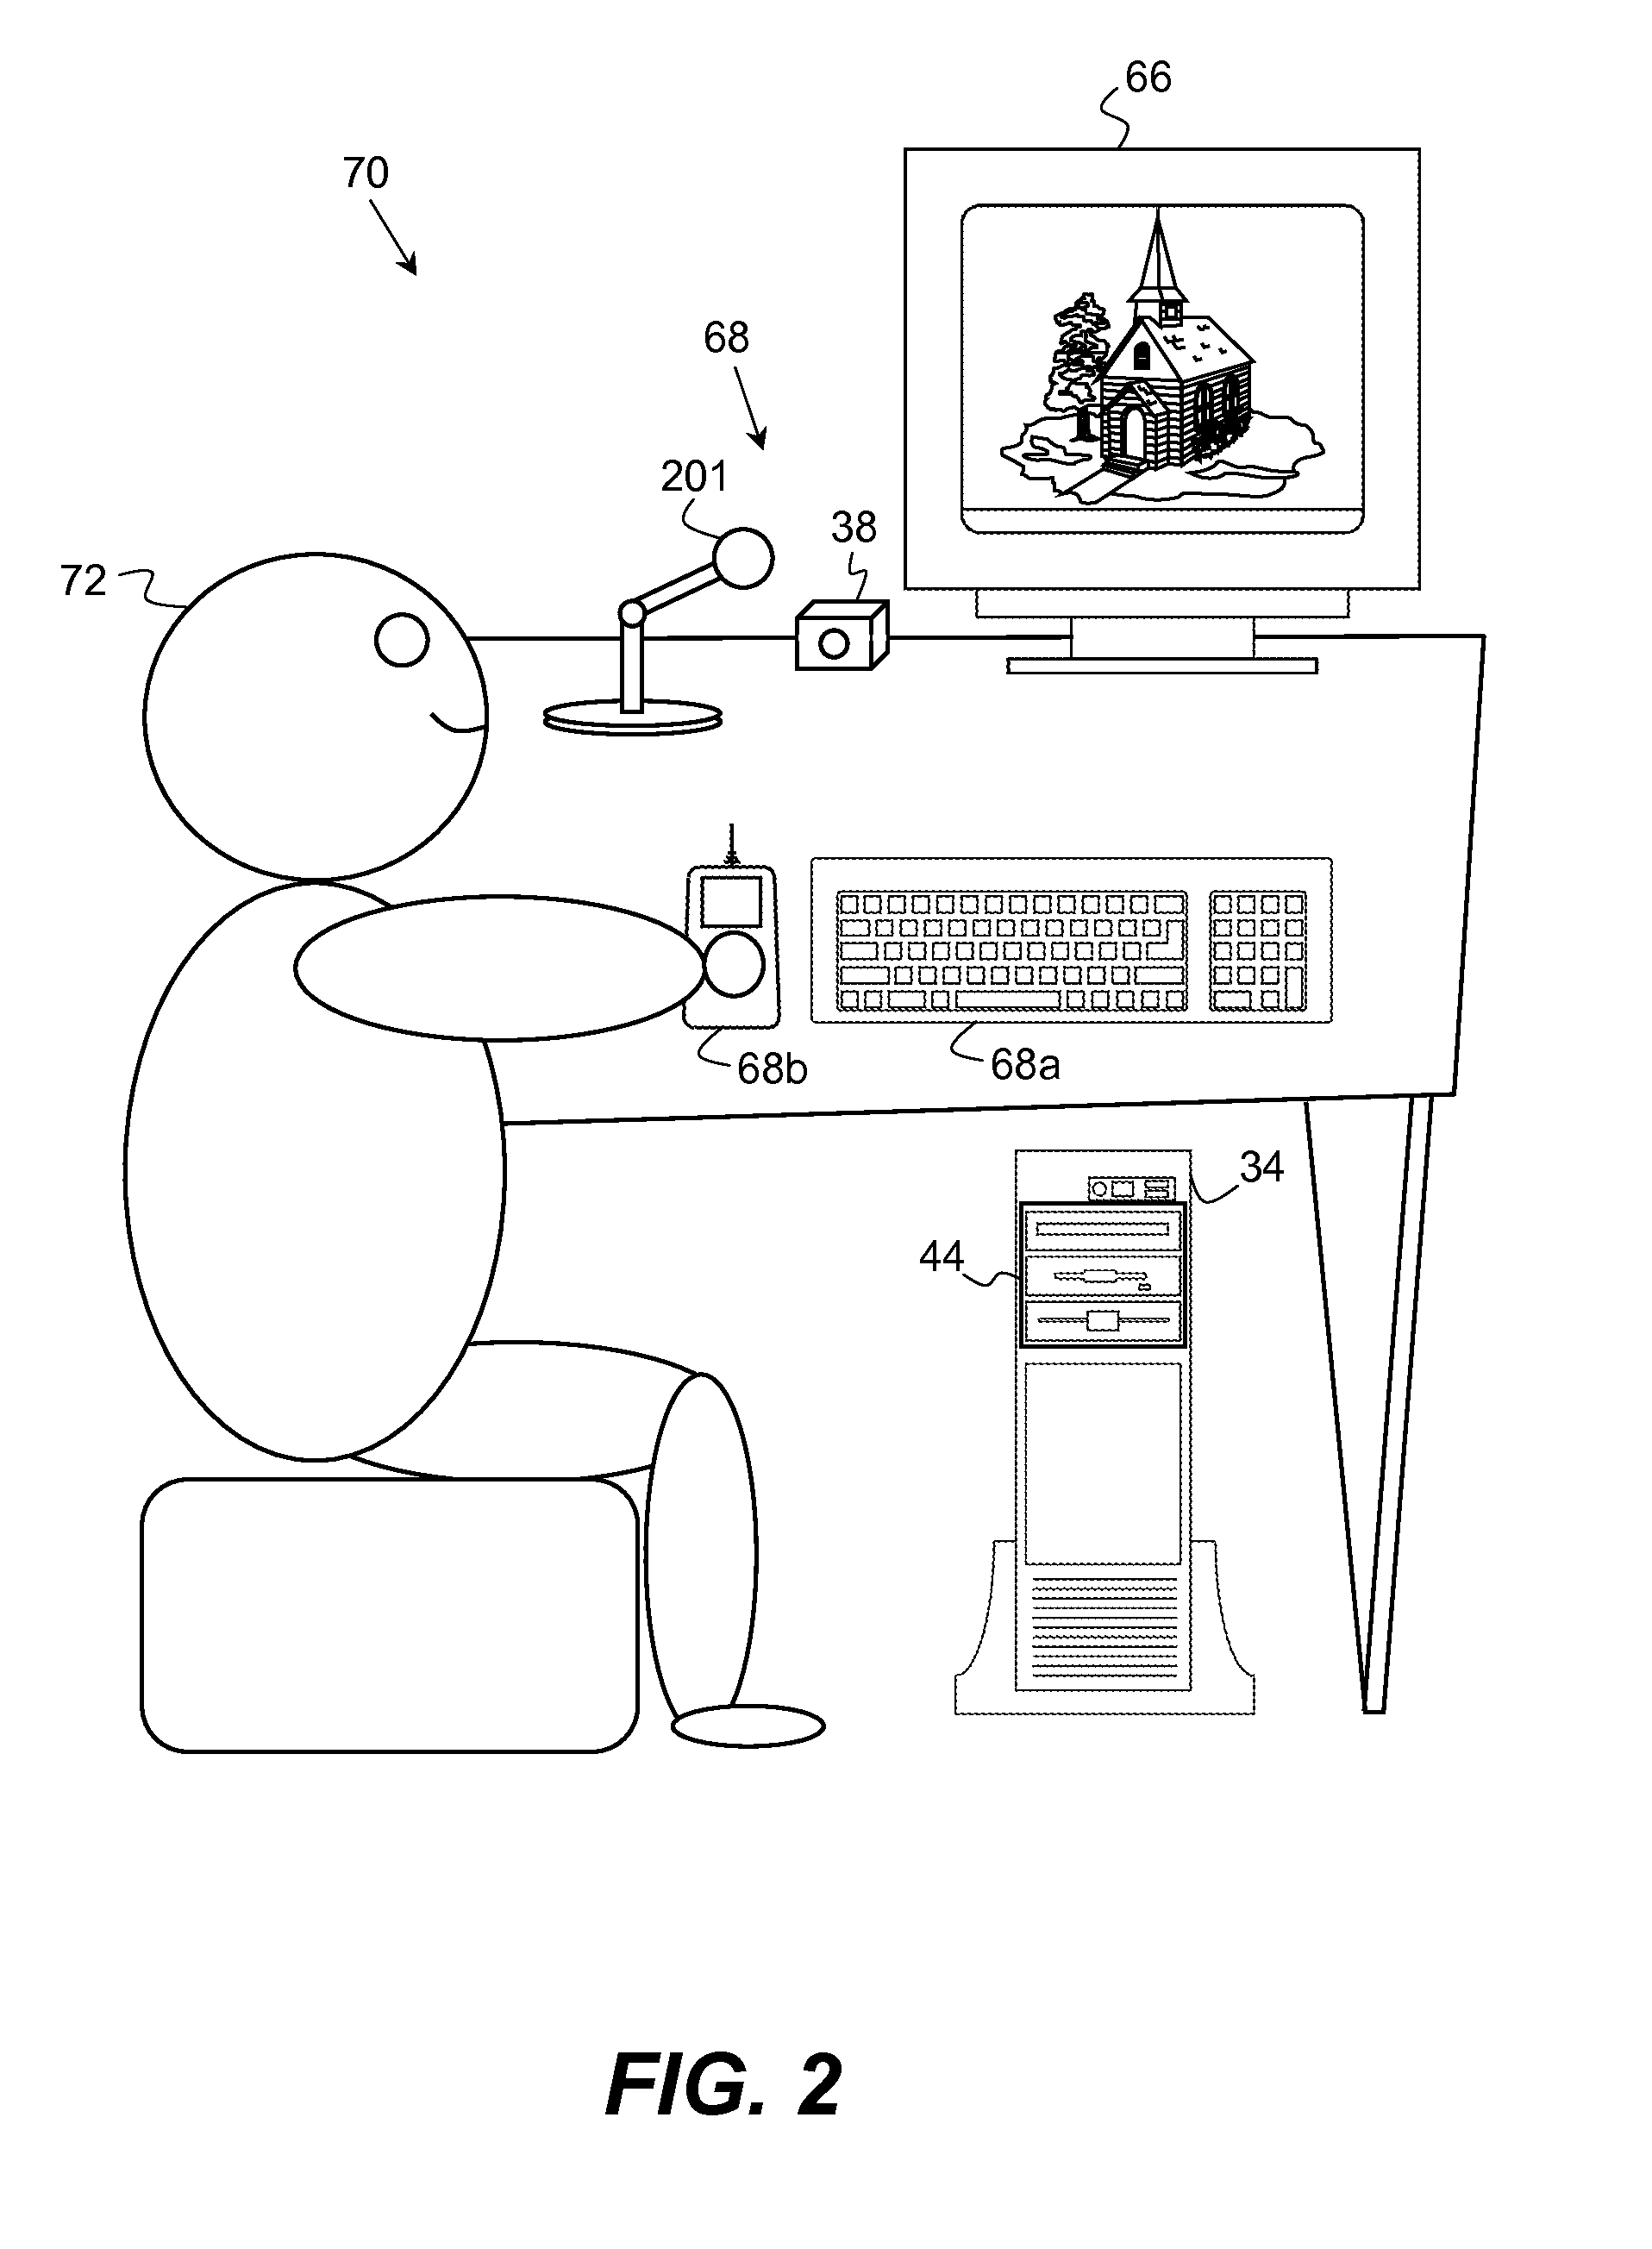 Image capture device with artistic template design